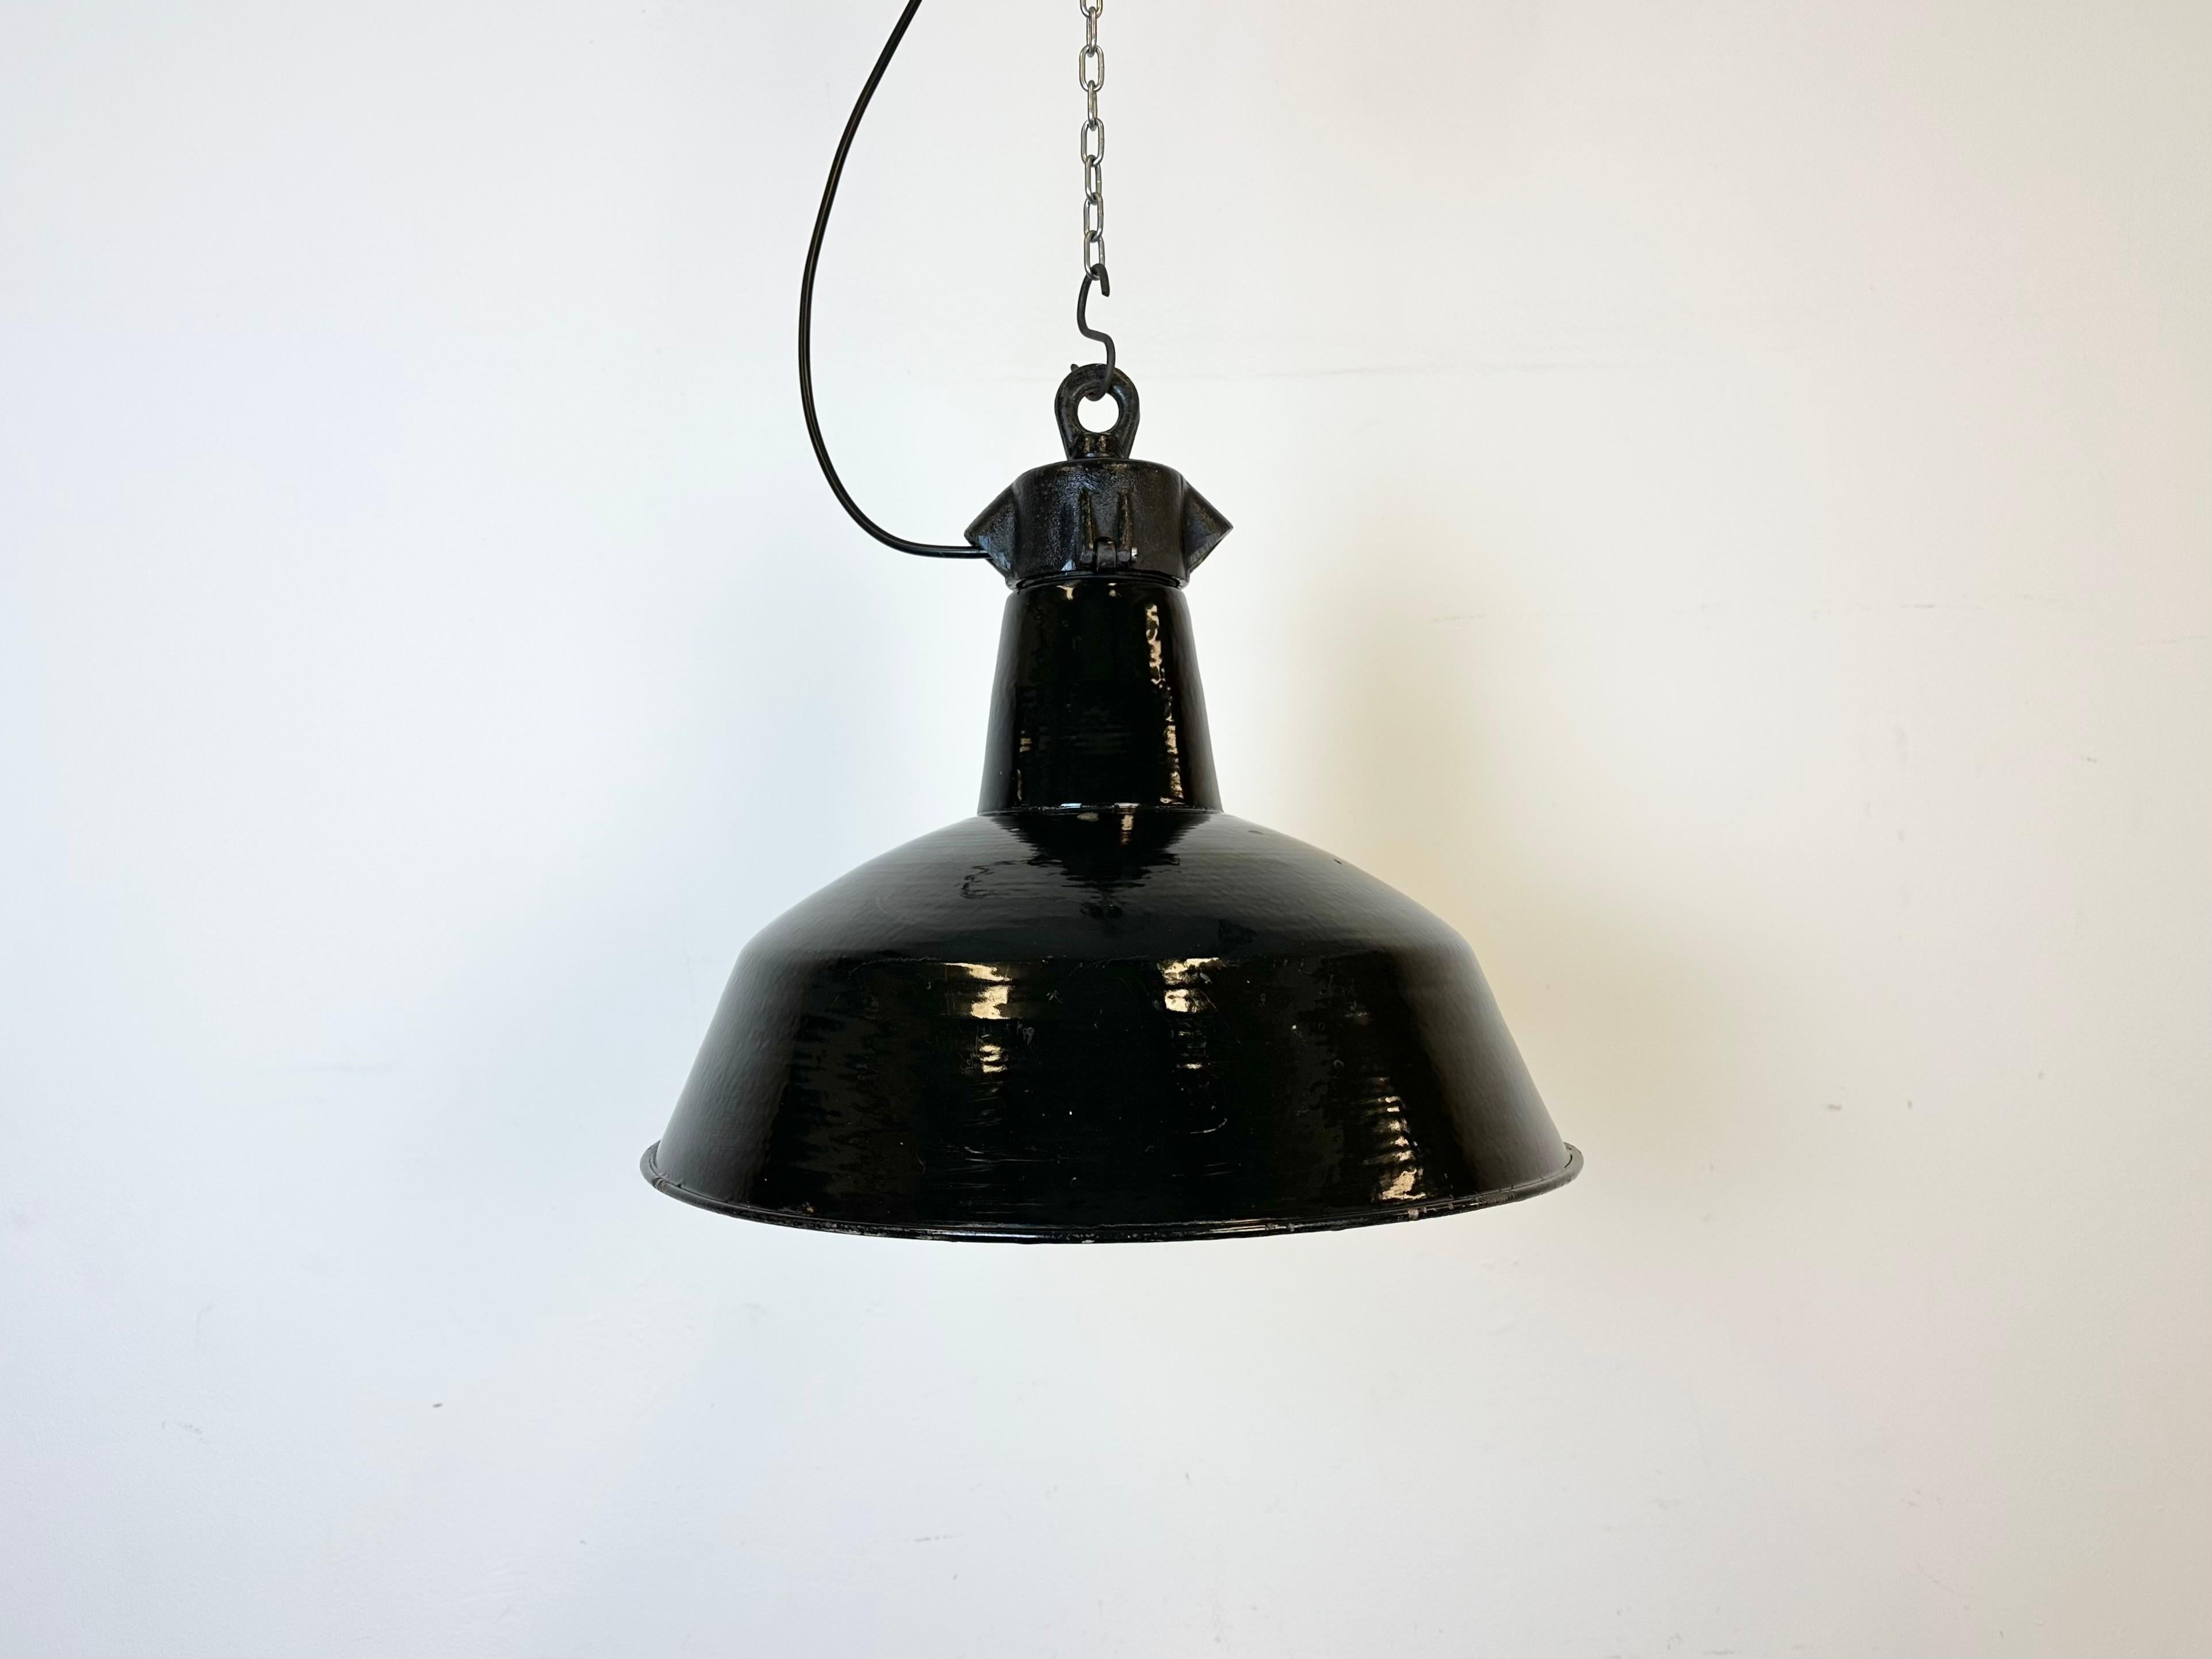 Industrial black enamel pendant light made by Elektrosvit in former Czechoslovakia during the 1950s. White enamel inside the shade. Cast iron top. The porcelain socket requires E 27/ E26 light bulbs. New wire. Fully functional. The weight of the